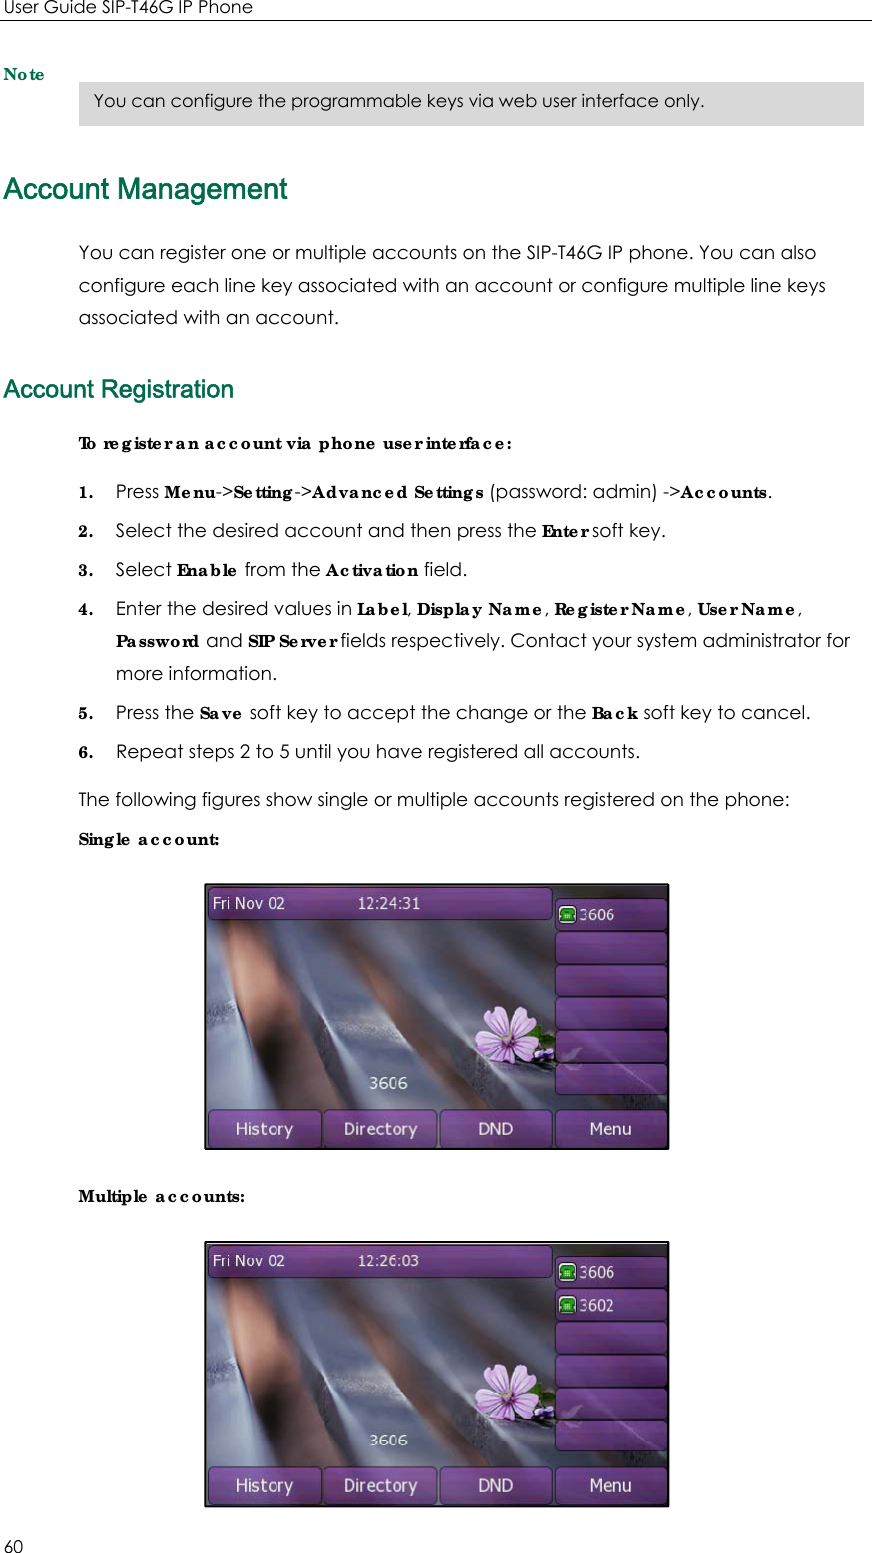 User Guide SIP-T46G IP Phone 60 Note Account Management You can register one or multiple accounts on the SIP-T46G IP phone. You can also configure each line key associated with an account or configure multiple line keys associated with an account. Account Registration To register an account via phone user interface: 1. Press Menu-&gt;Setting-&gt;Advanced Settings (password: admin) -&gt;Accounts. 2. Select the desired account and then press the Enter soft key. 3. Select Enable from the Activation field. 4. Enter the desired values in Label, Display Name, Register Name, User Name, Password and SIP Server fields respectively. Contact your system administrator for more information. 5. Press the Save soft key to accept the change or the Back soft key to cancel. 6. Repeat steps 2 to 5 until you have registered all accounts. The following figures show single or multiple accounts registered on the phone: Single account:  Multiple accounts:  You can configure the programmable keys via web user interface only. 